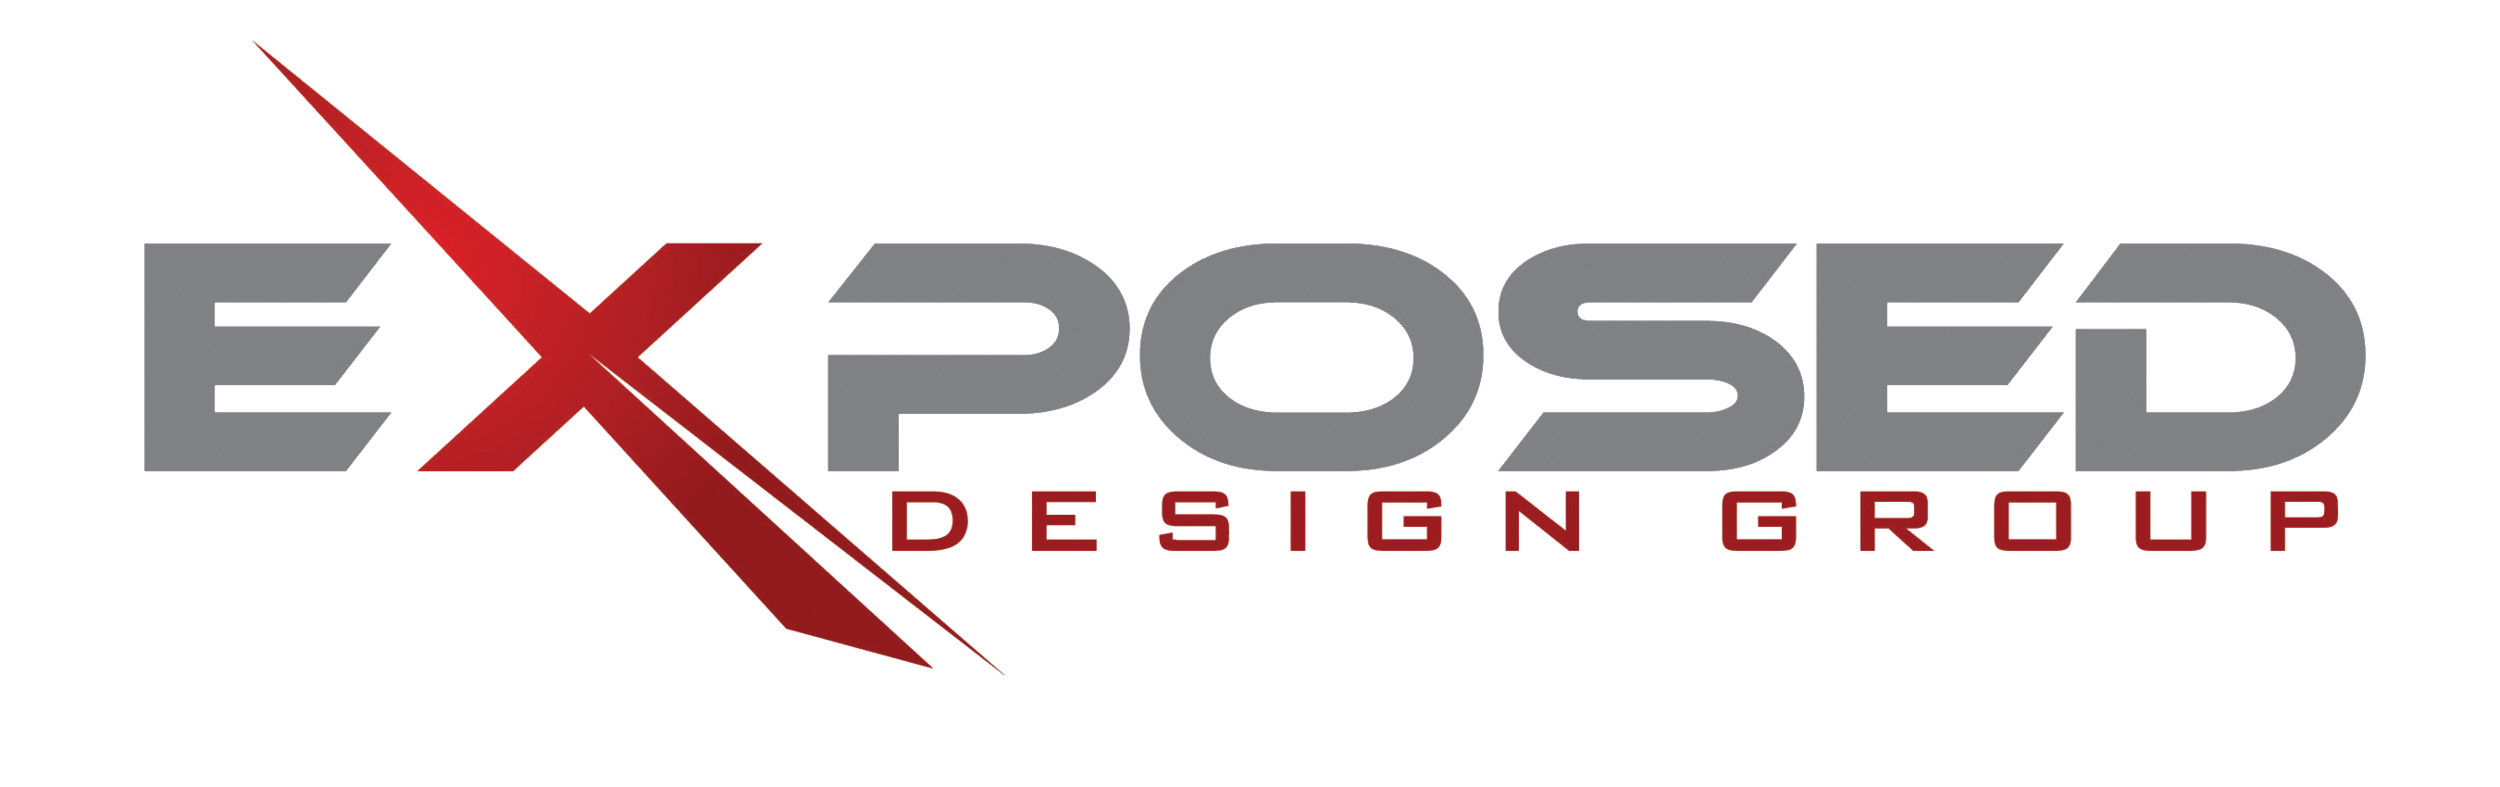 Exposed Design Group